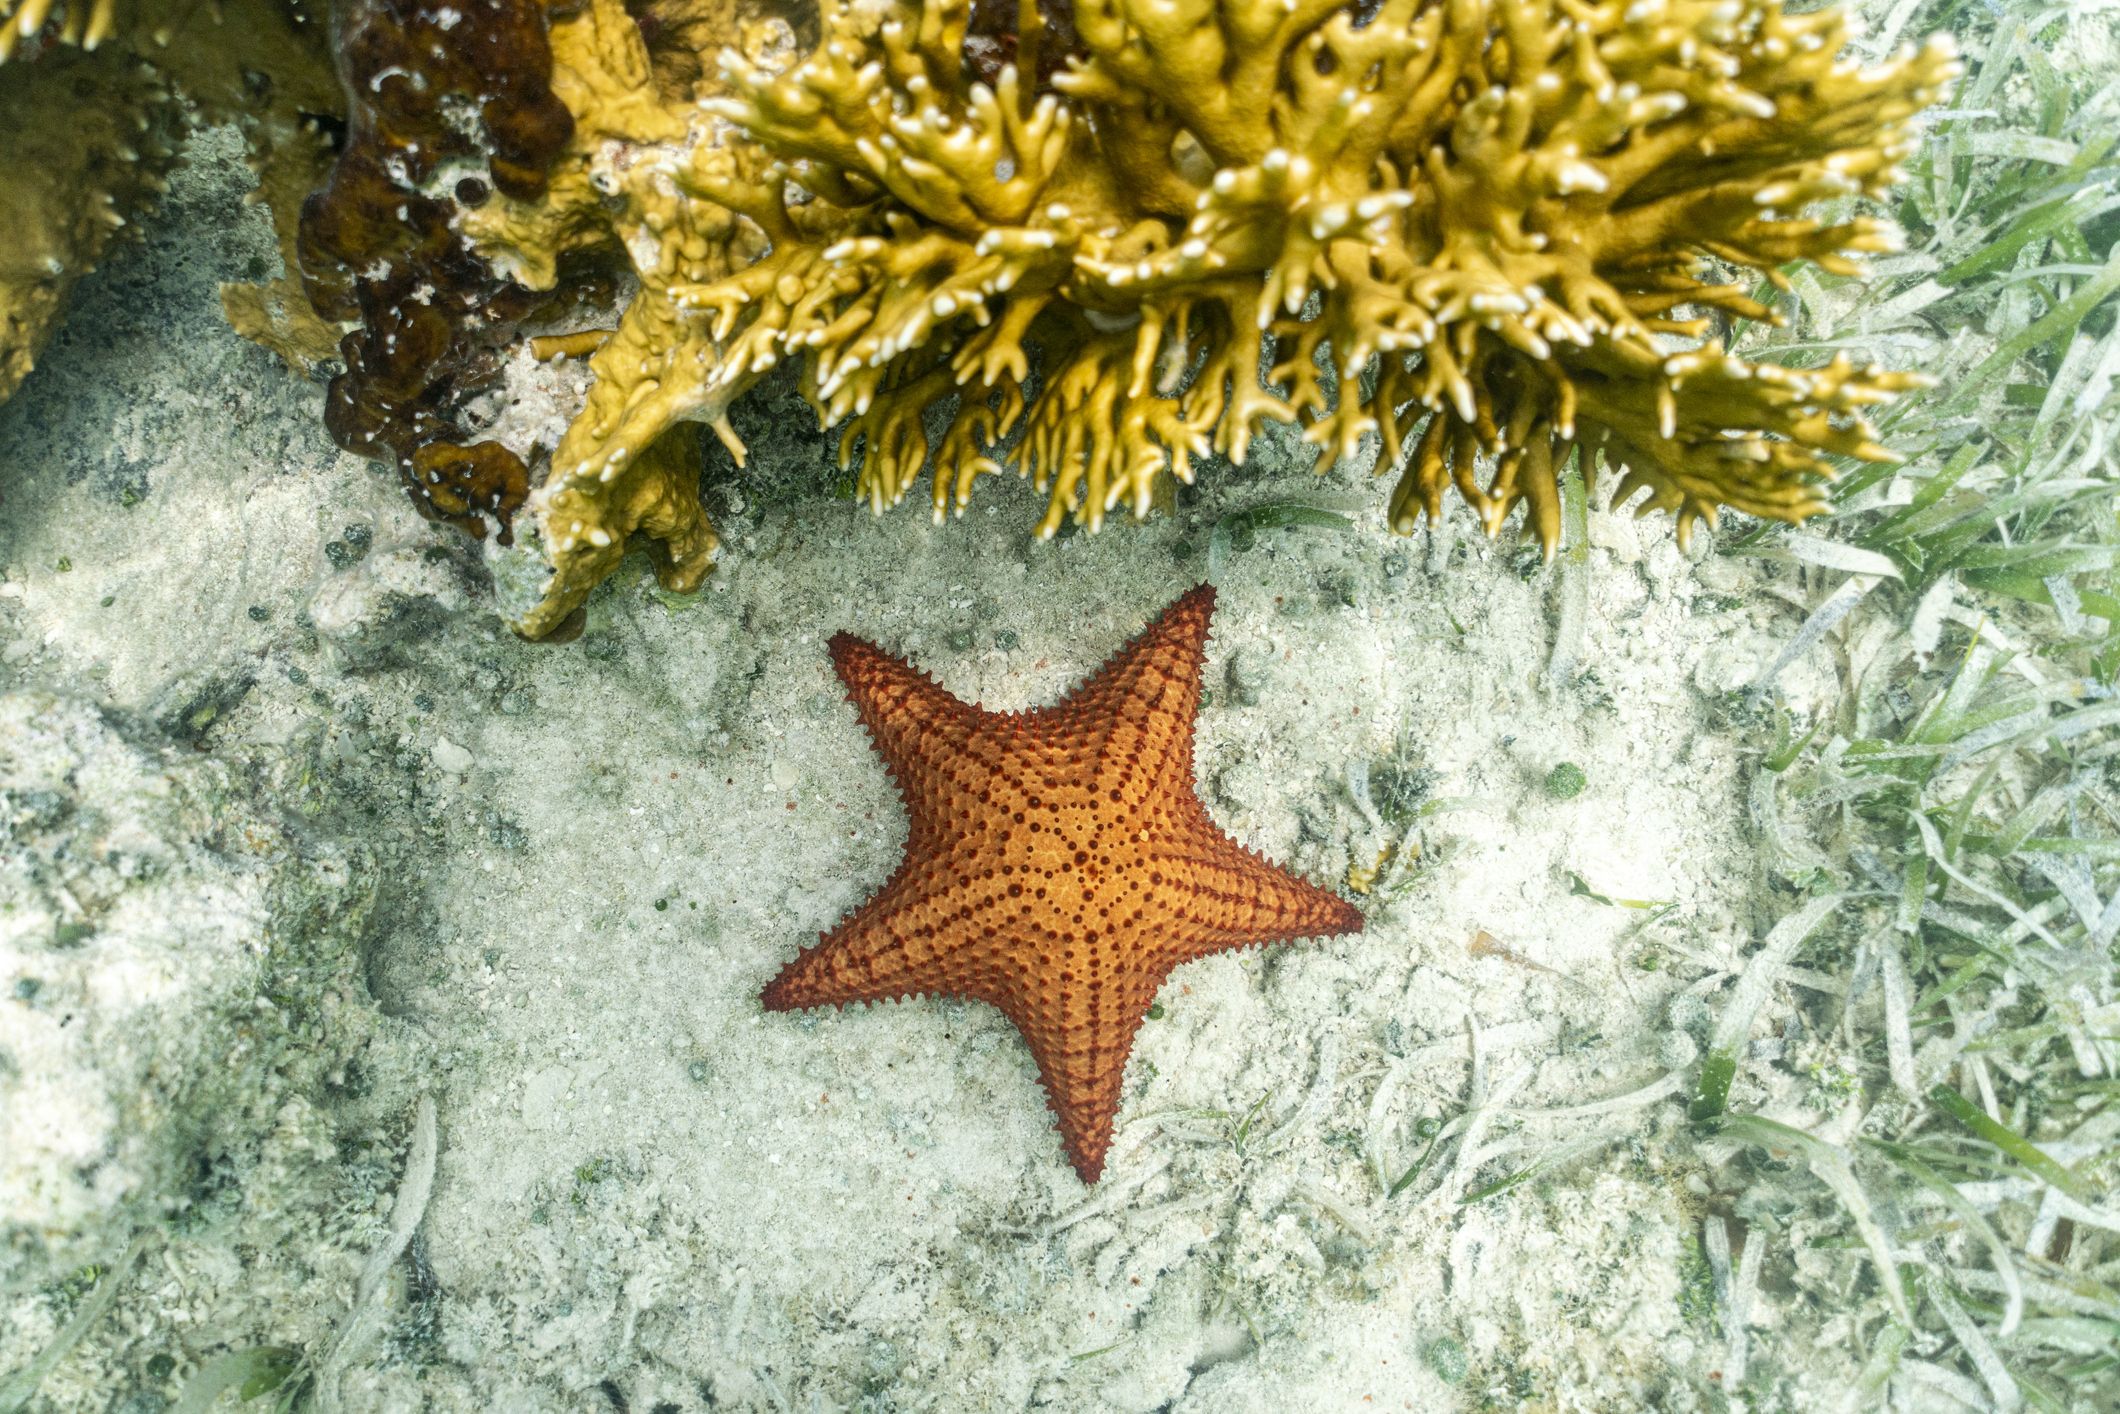 Starfish Are Basically Walking Heads, and Literally Nothing Else